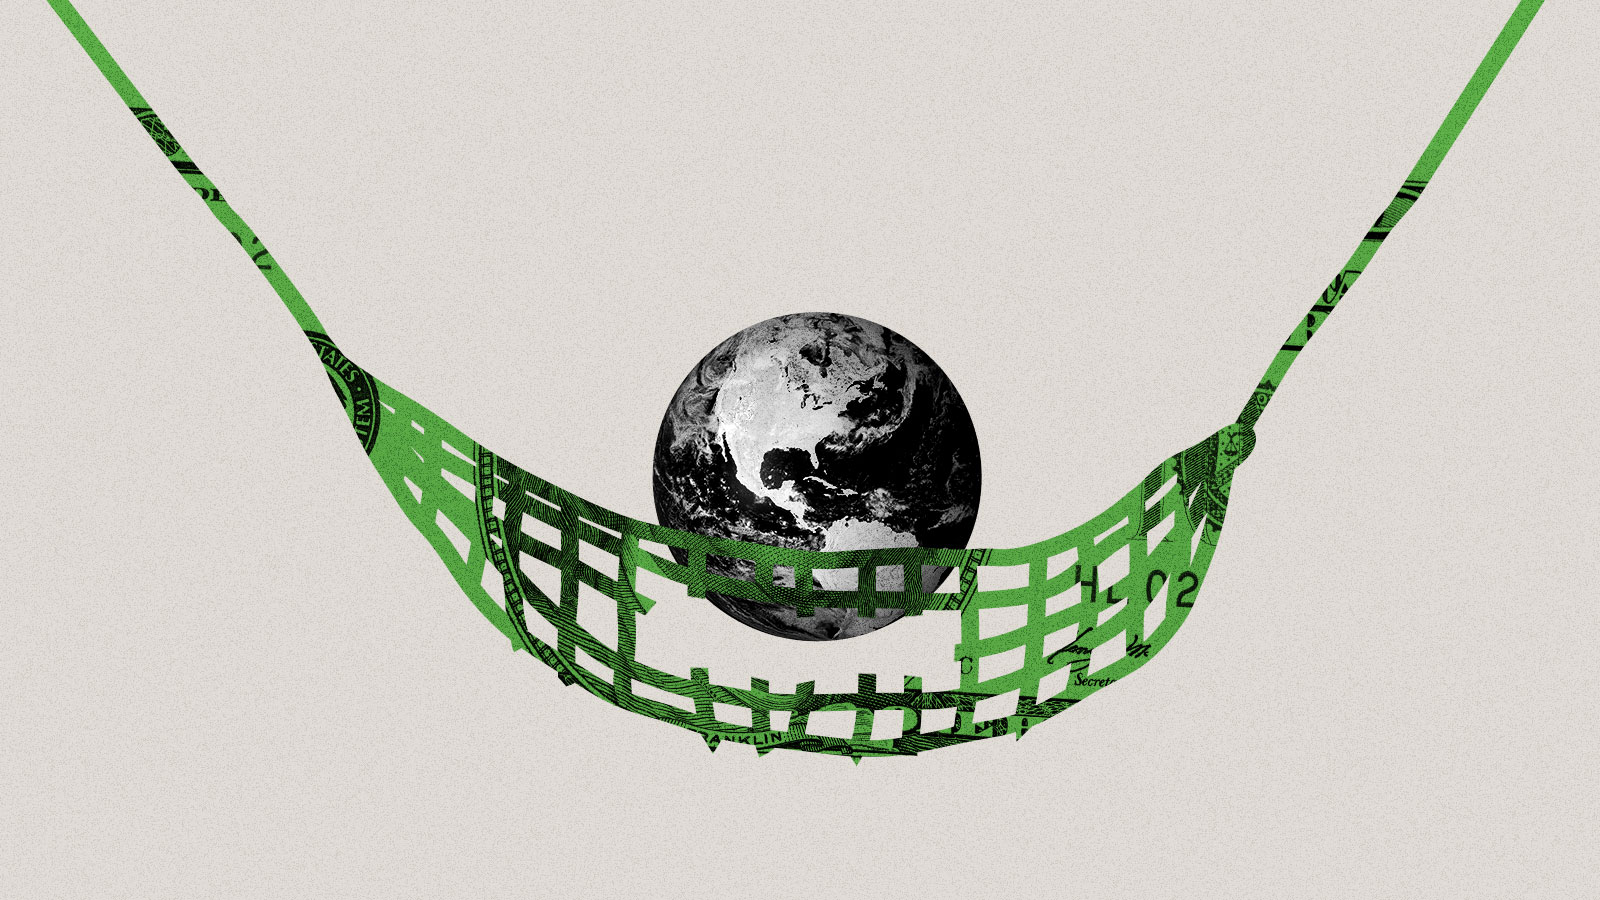 Collage of earth falling into a broken net made of a dollar bill